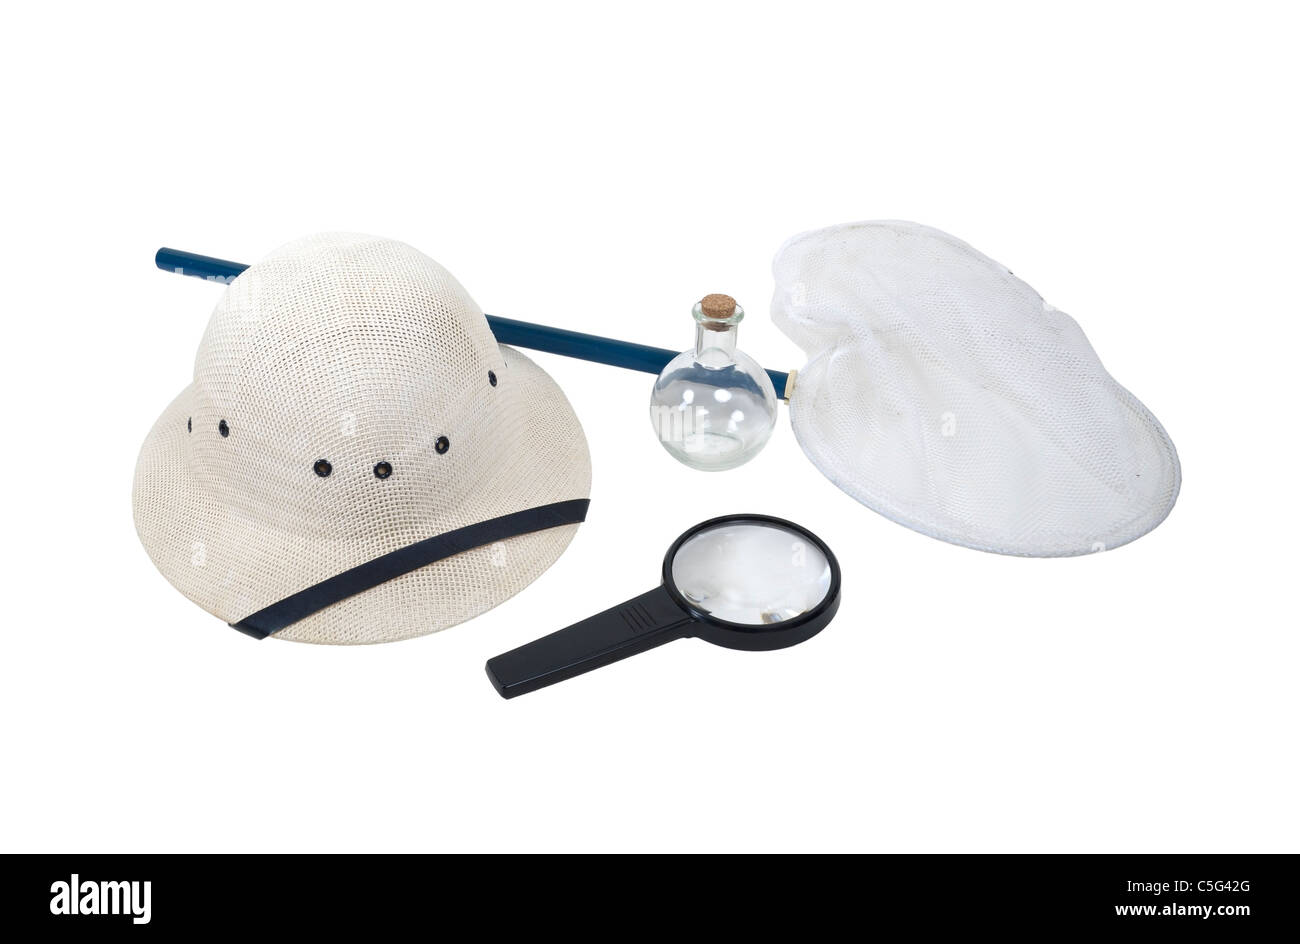 Specimen collection kit shown by a pith helmet, butterfly net, magnifying glass, and sample jar Stock Photo